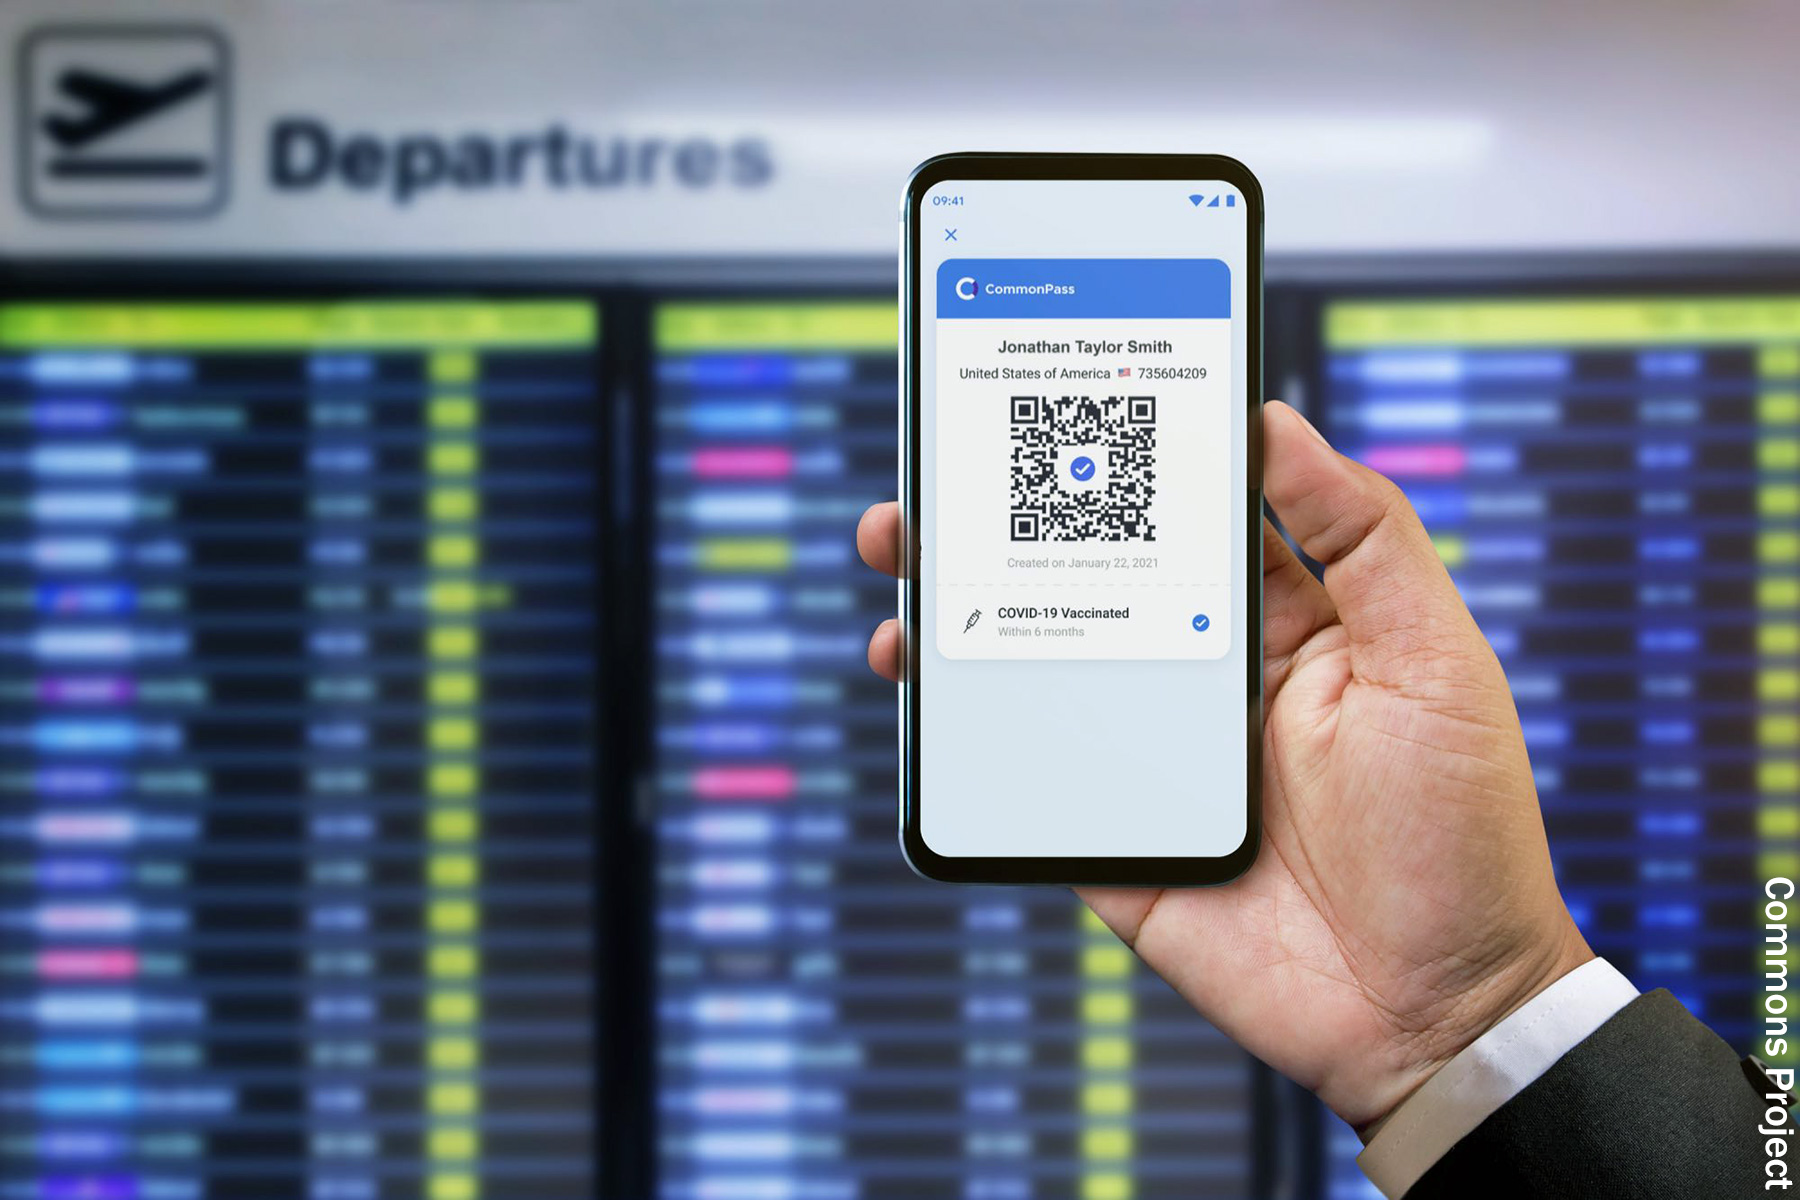 Apps to Let Travelers, Others Show COVID-19 Status